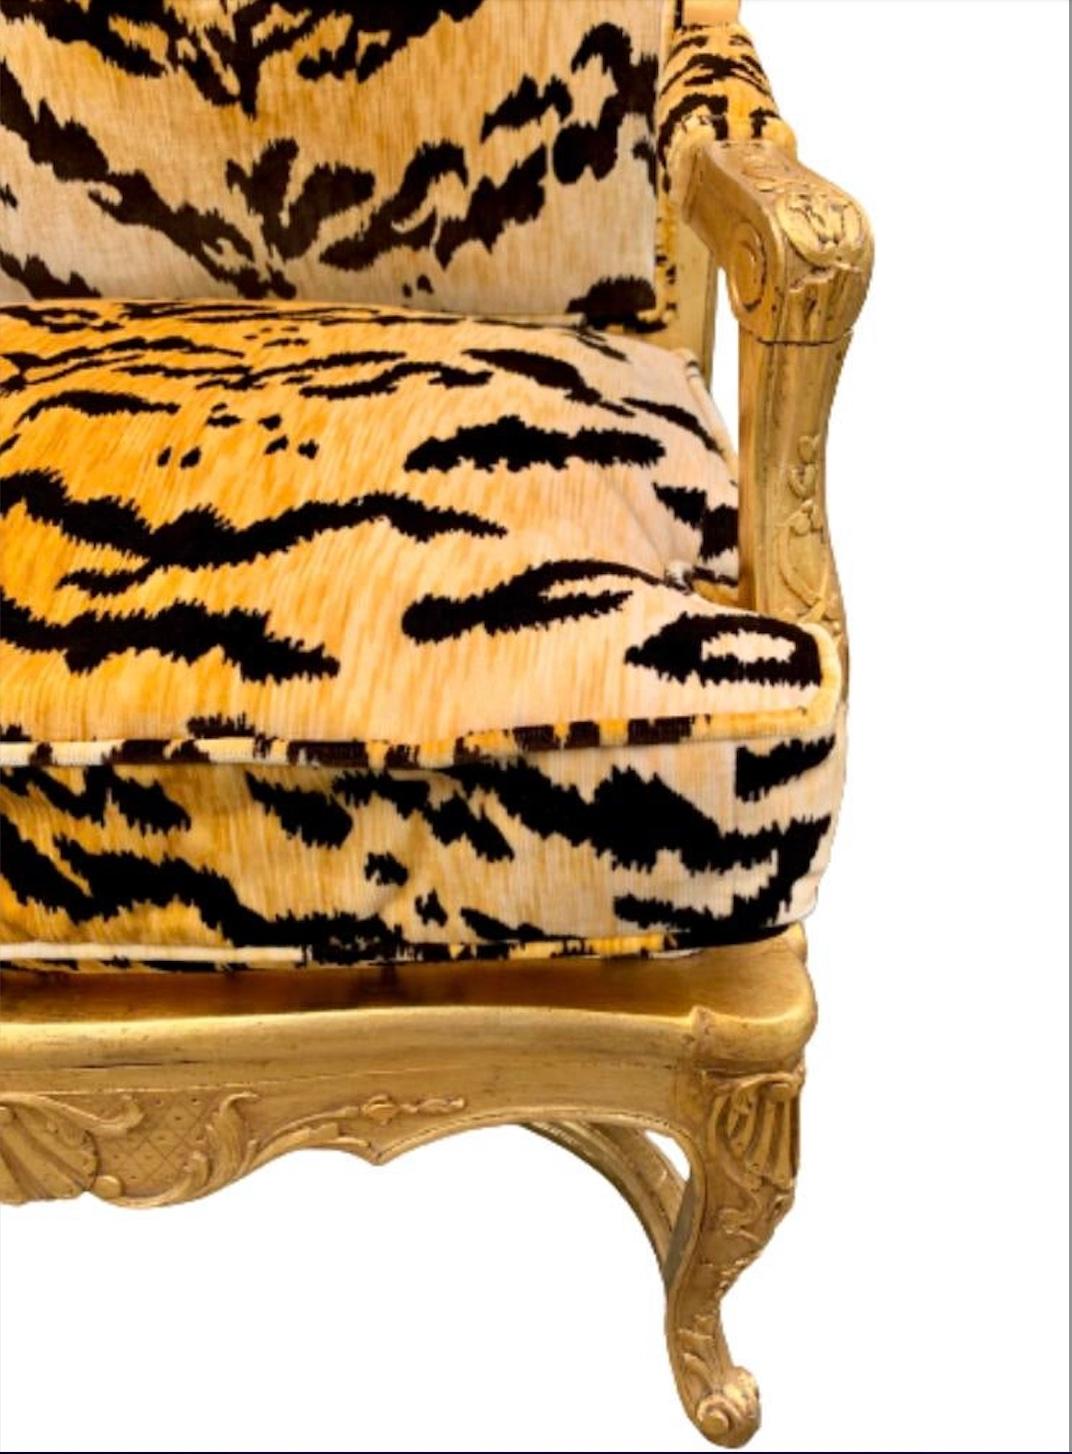 French Regency Giltwood Fauteuil Lounge Chair in Scalamandré Le Tigre Tiger Silk In Good Condition For Sale In Elkhart, IN